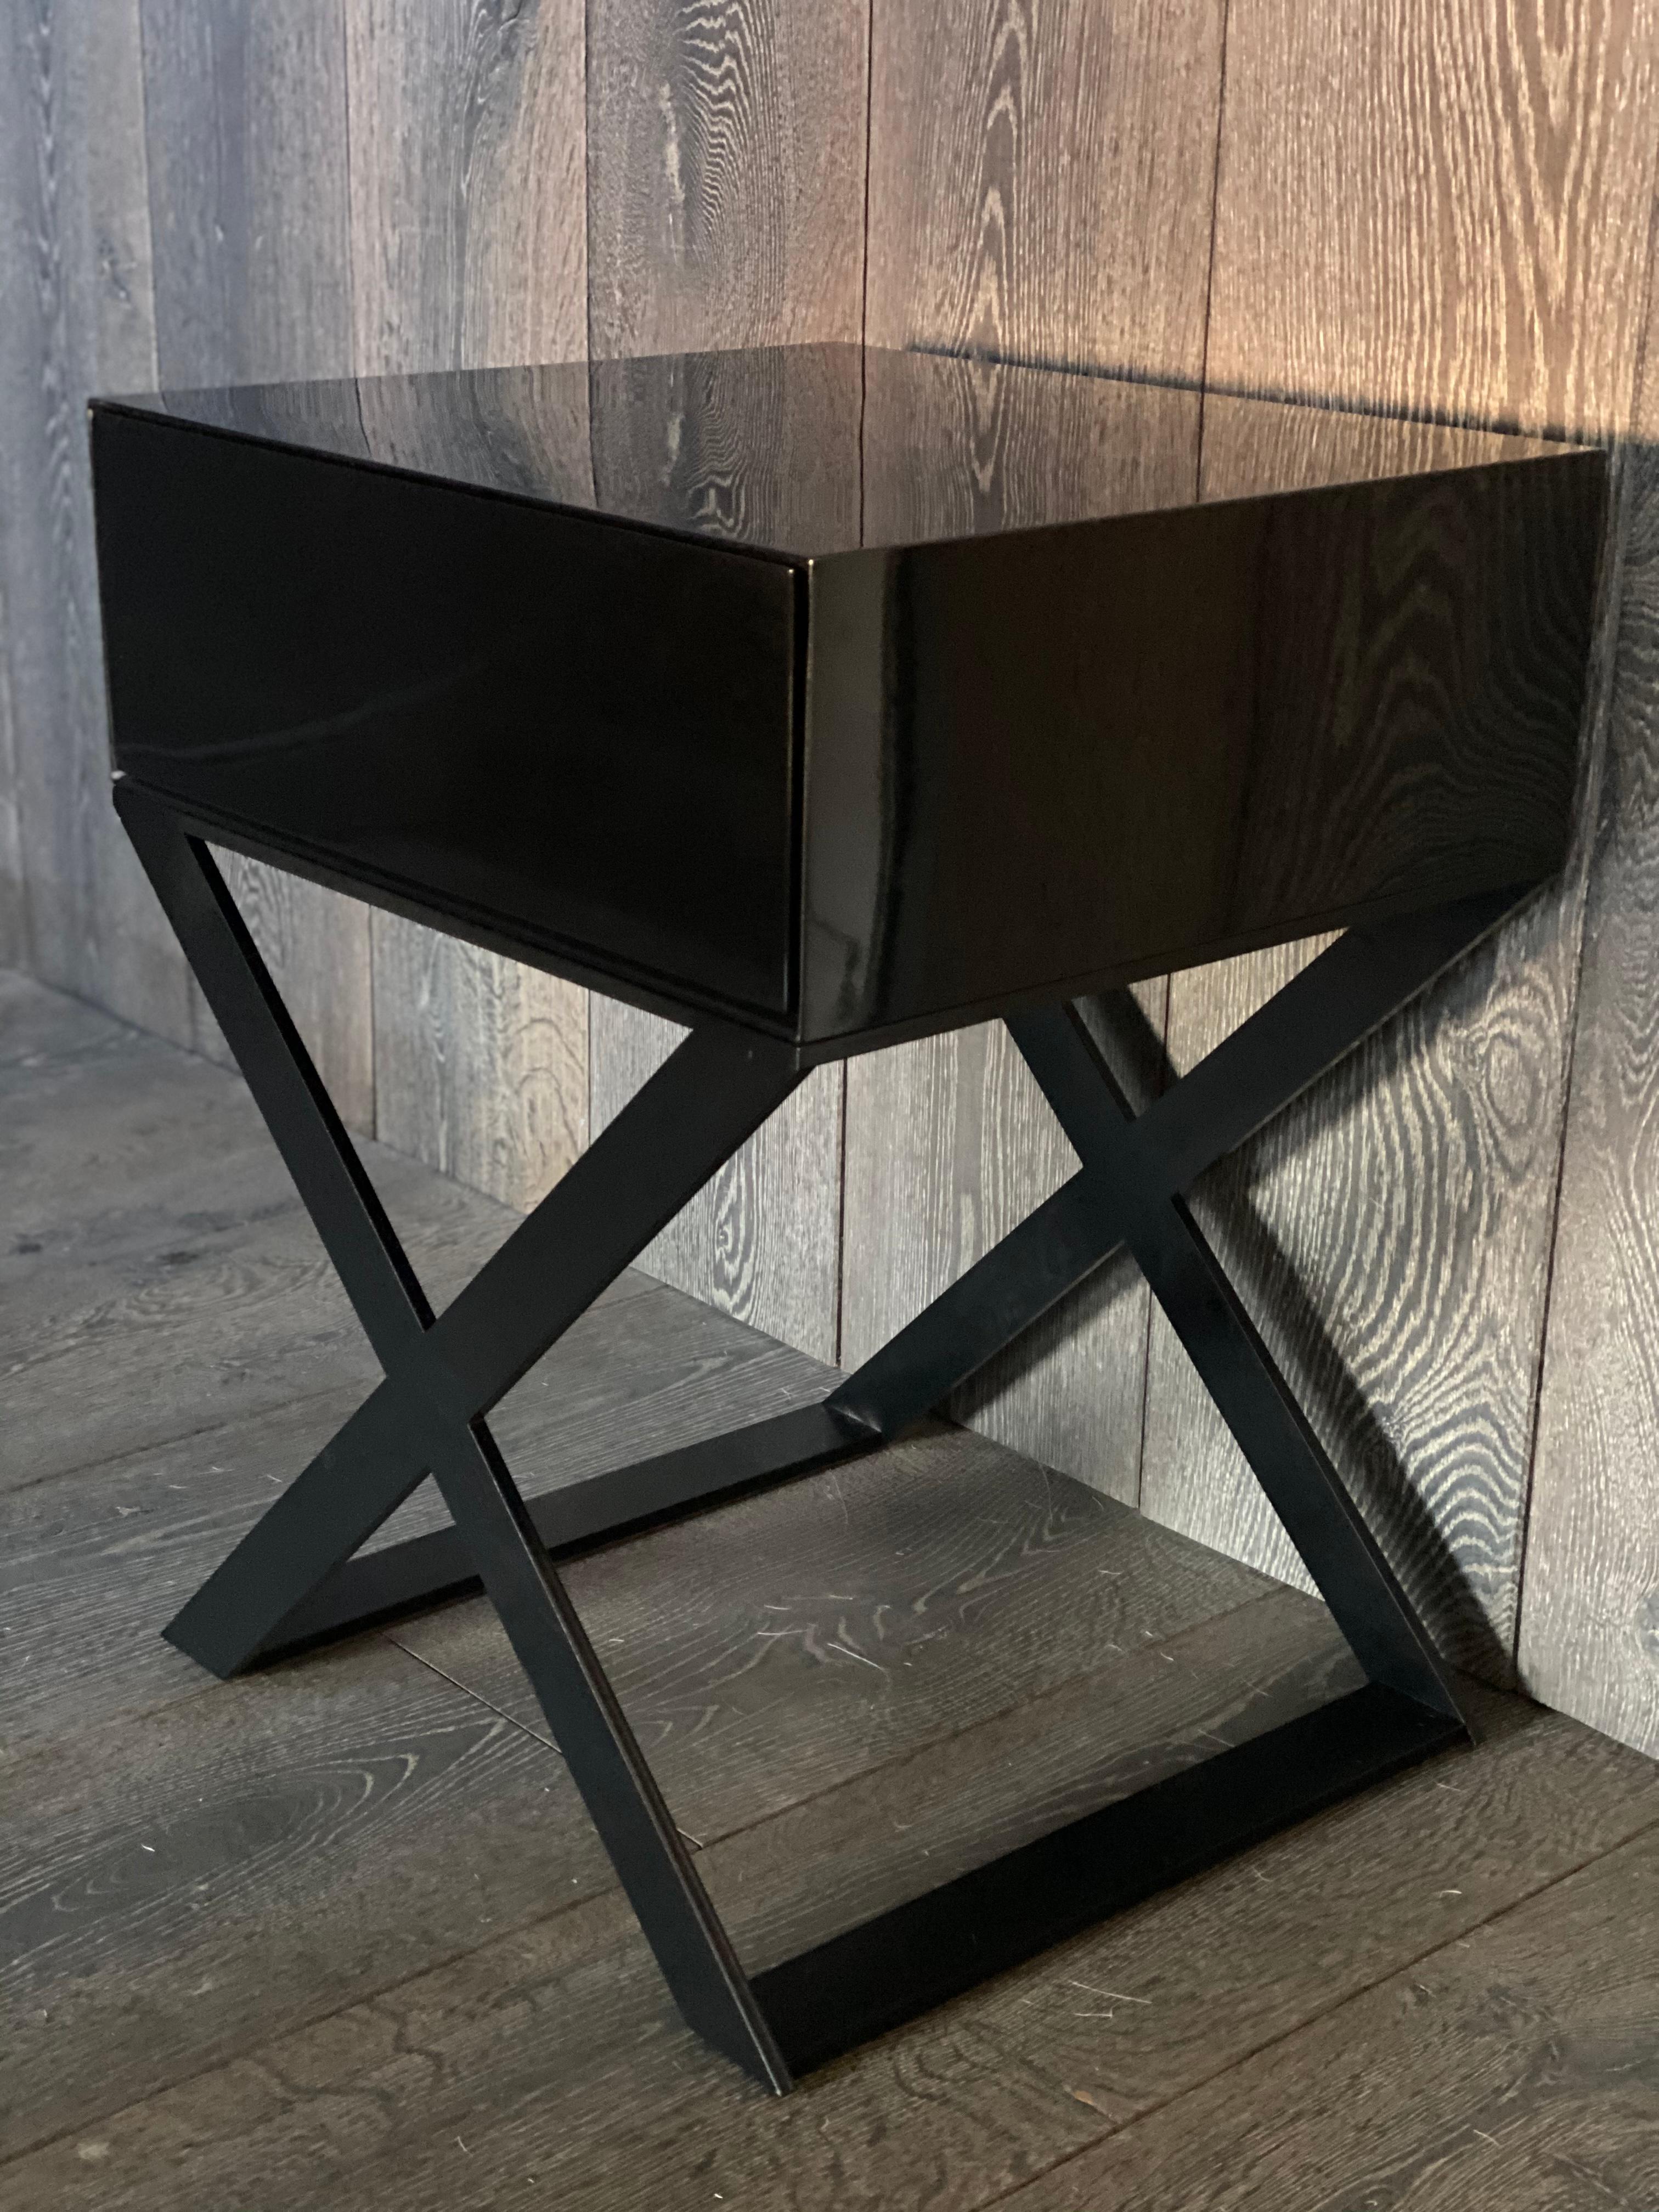 Looking to revive a bedroom by introducing some passion and glamour? Look no further than the X-leg bedside table. Minimal, clean lines and exquisite materials, such as metallic and wooden finishes, allow the X-Leg Bedside Table to introduce